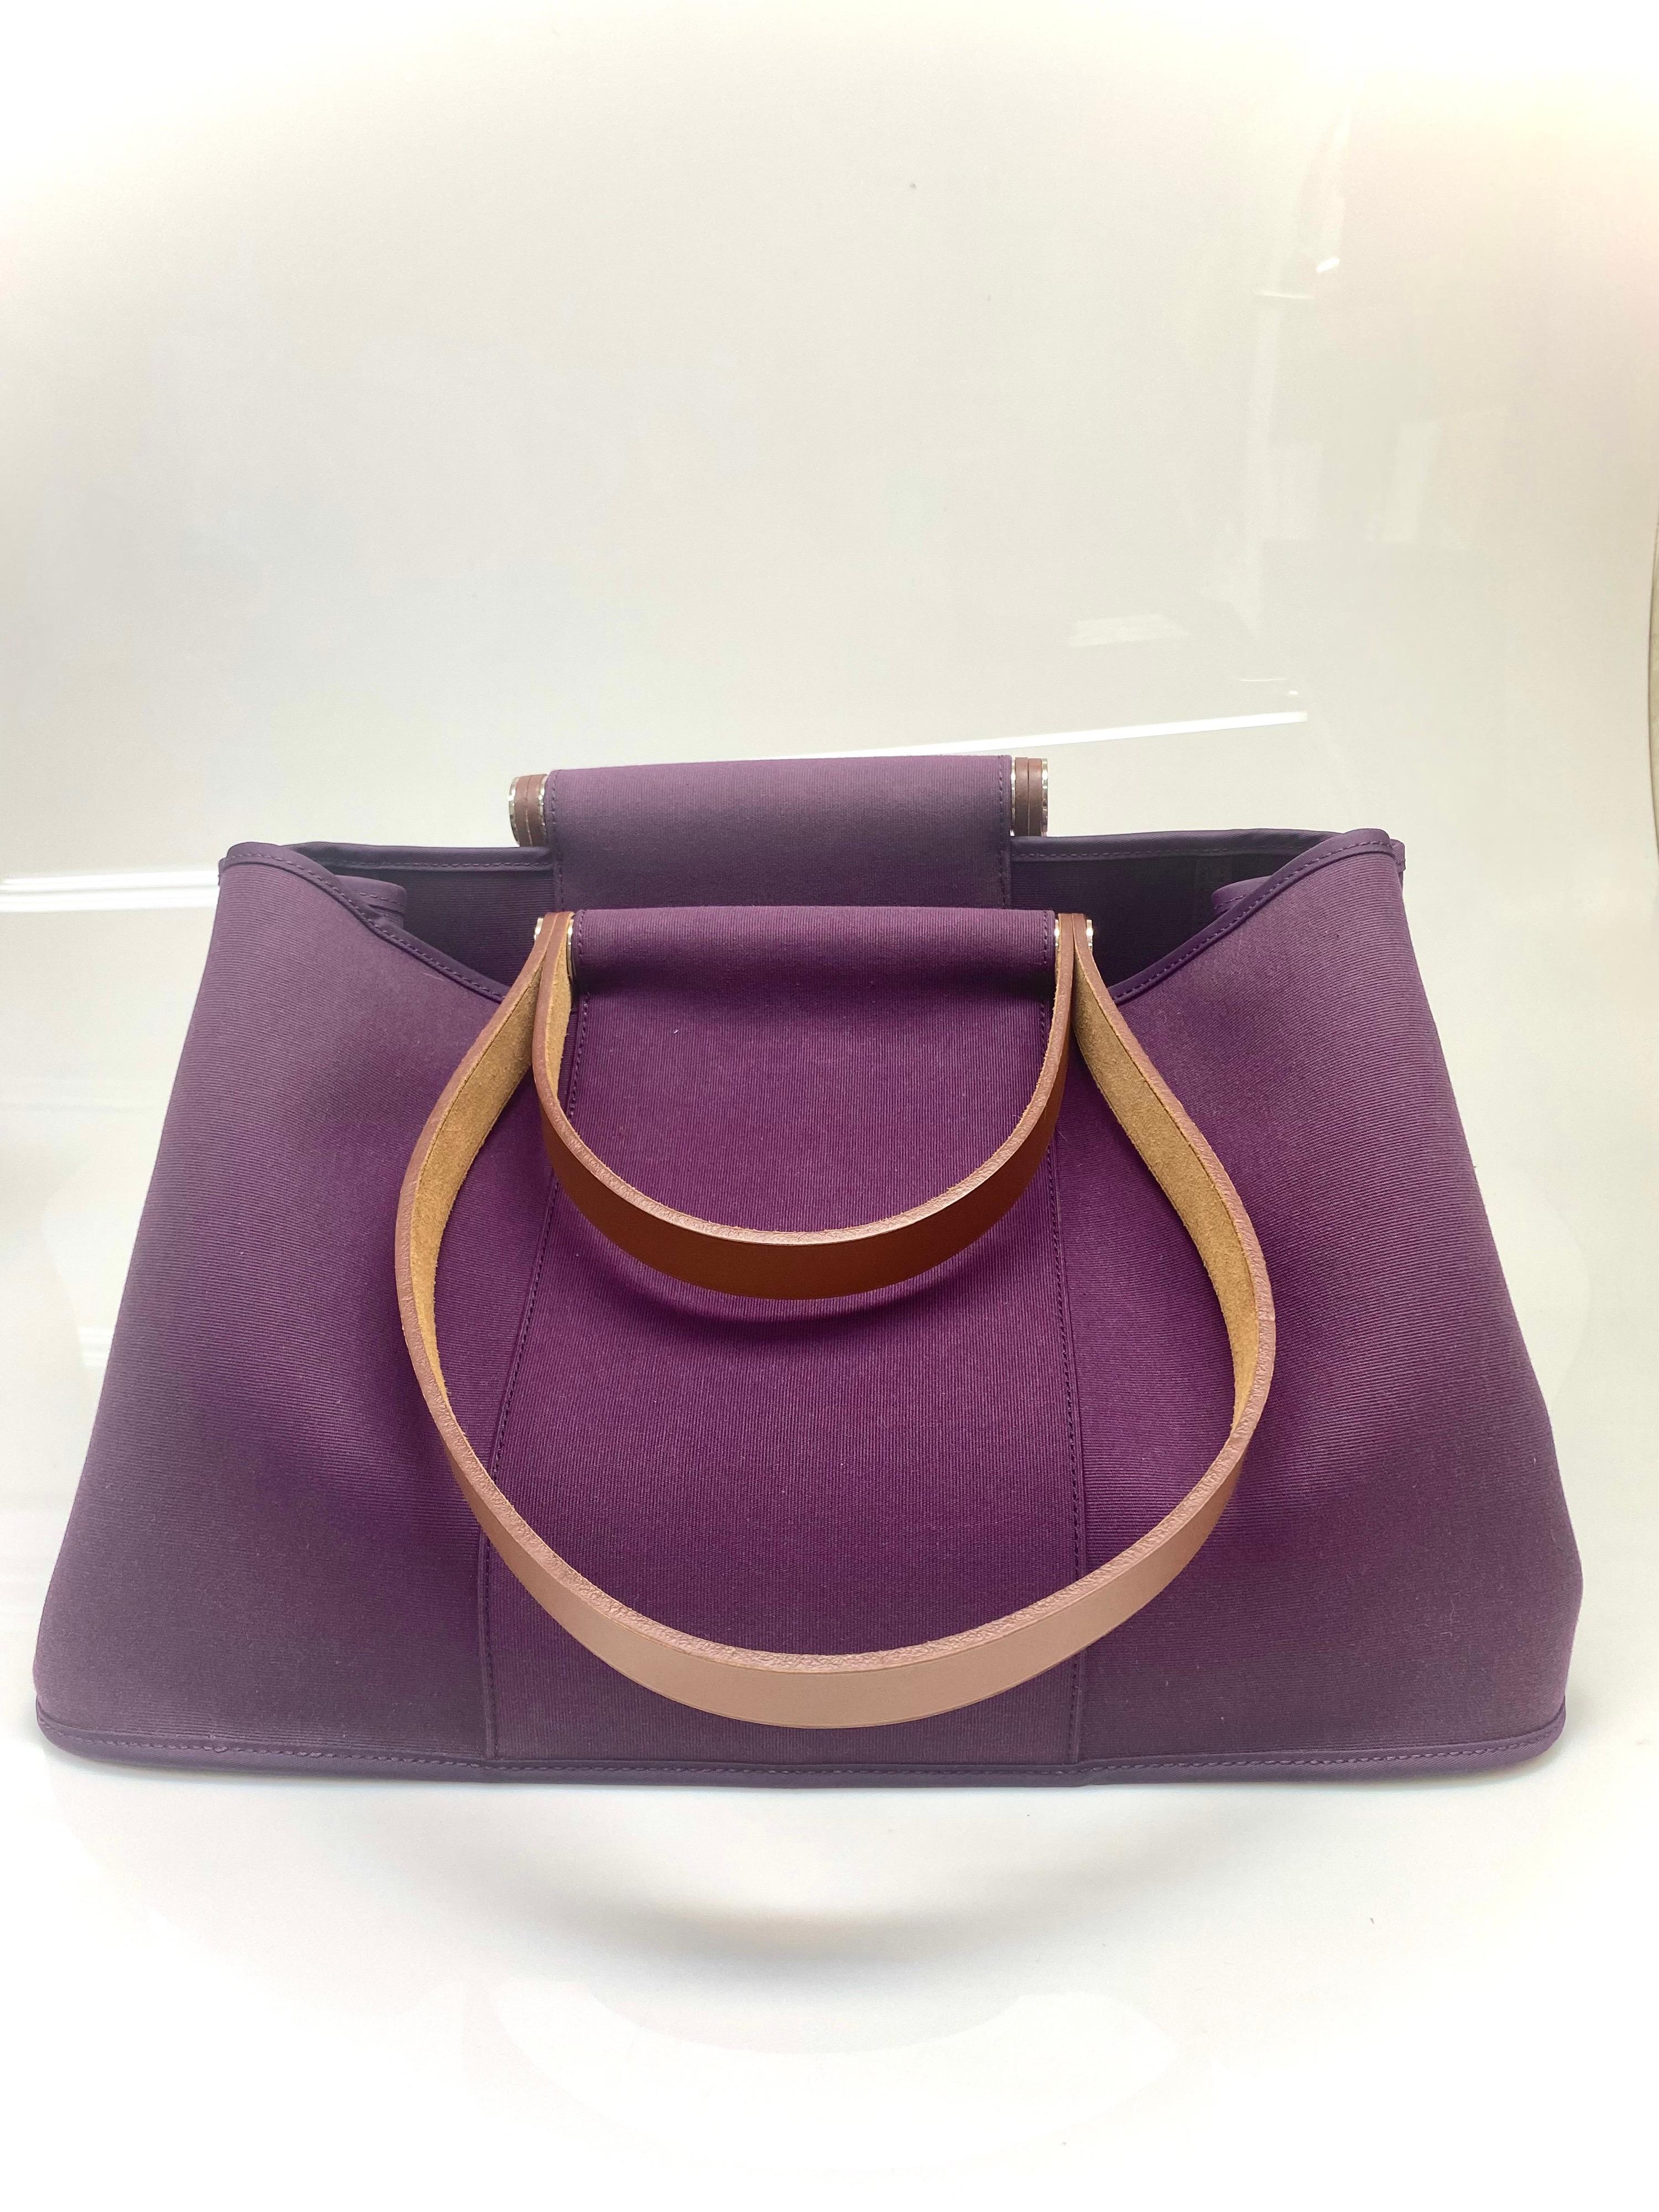 The Hermes Cabag is a simple & elegant tote that is perfect for everyday luxury. The fuchsia-colored canvas exterior is complemented by hunter leather straps sets of short handles & longer handles to use a hand or shoulder bag. Inside are 2 hanging